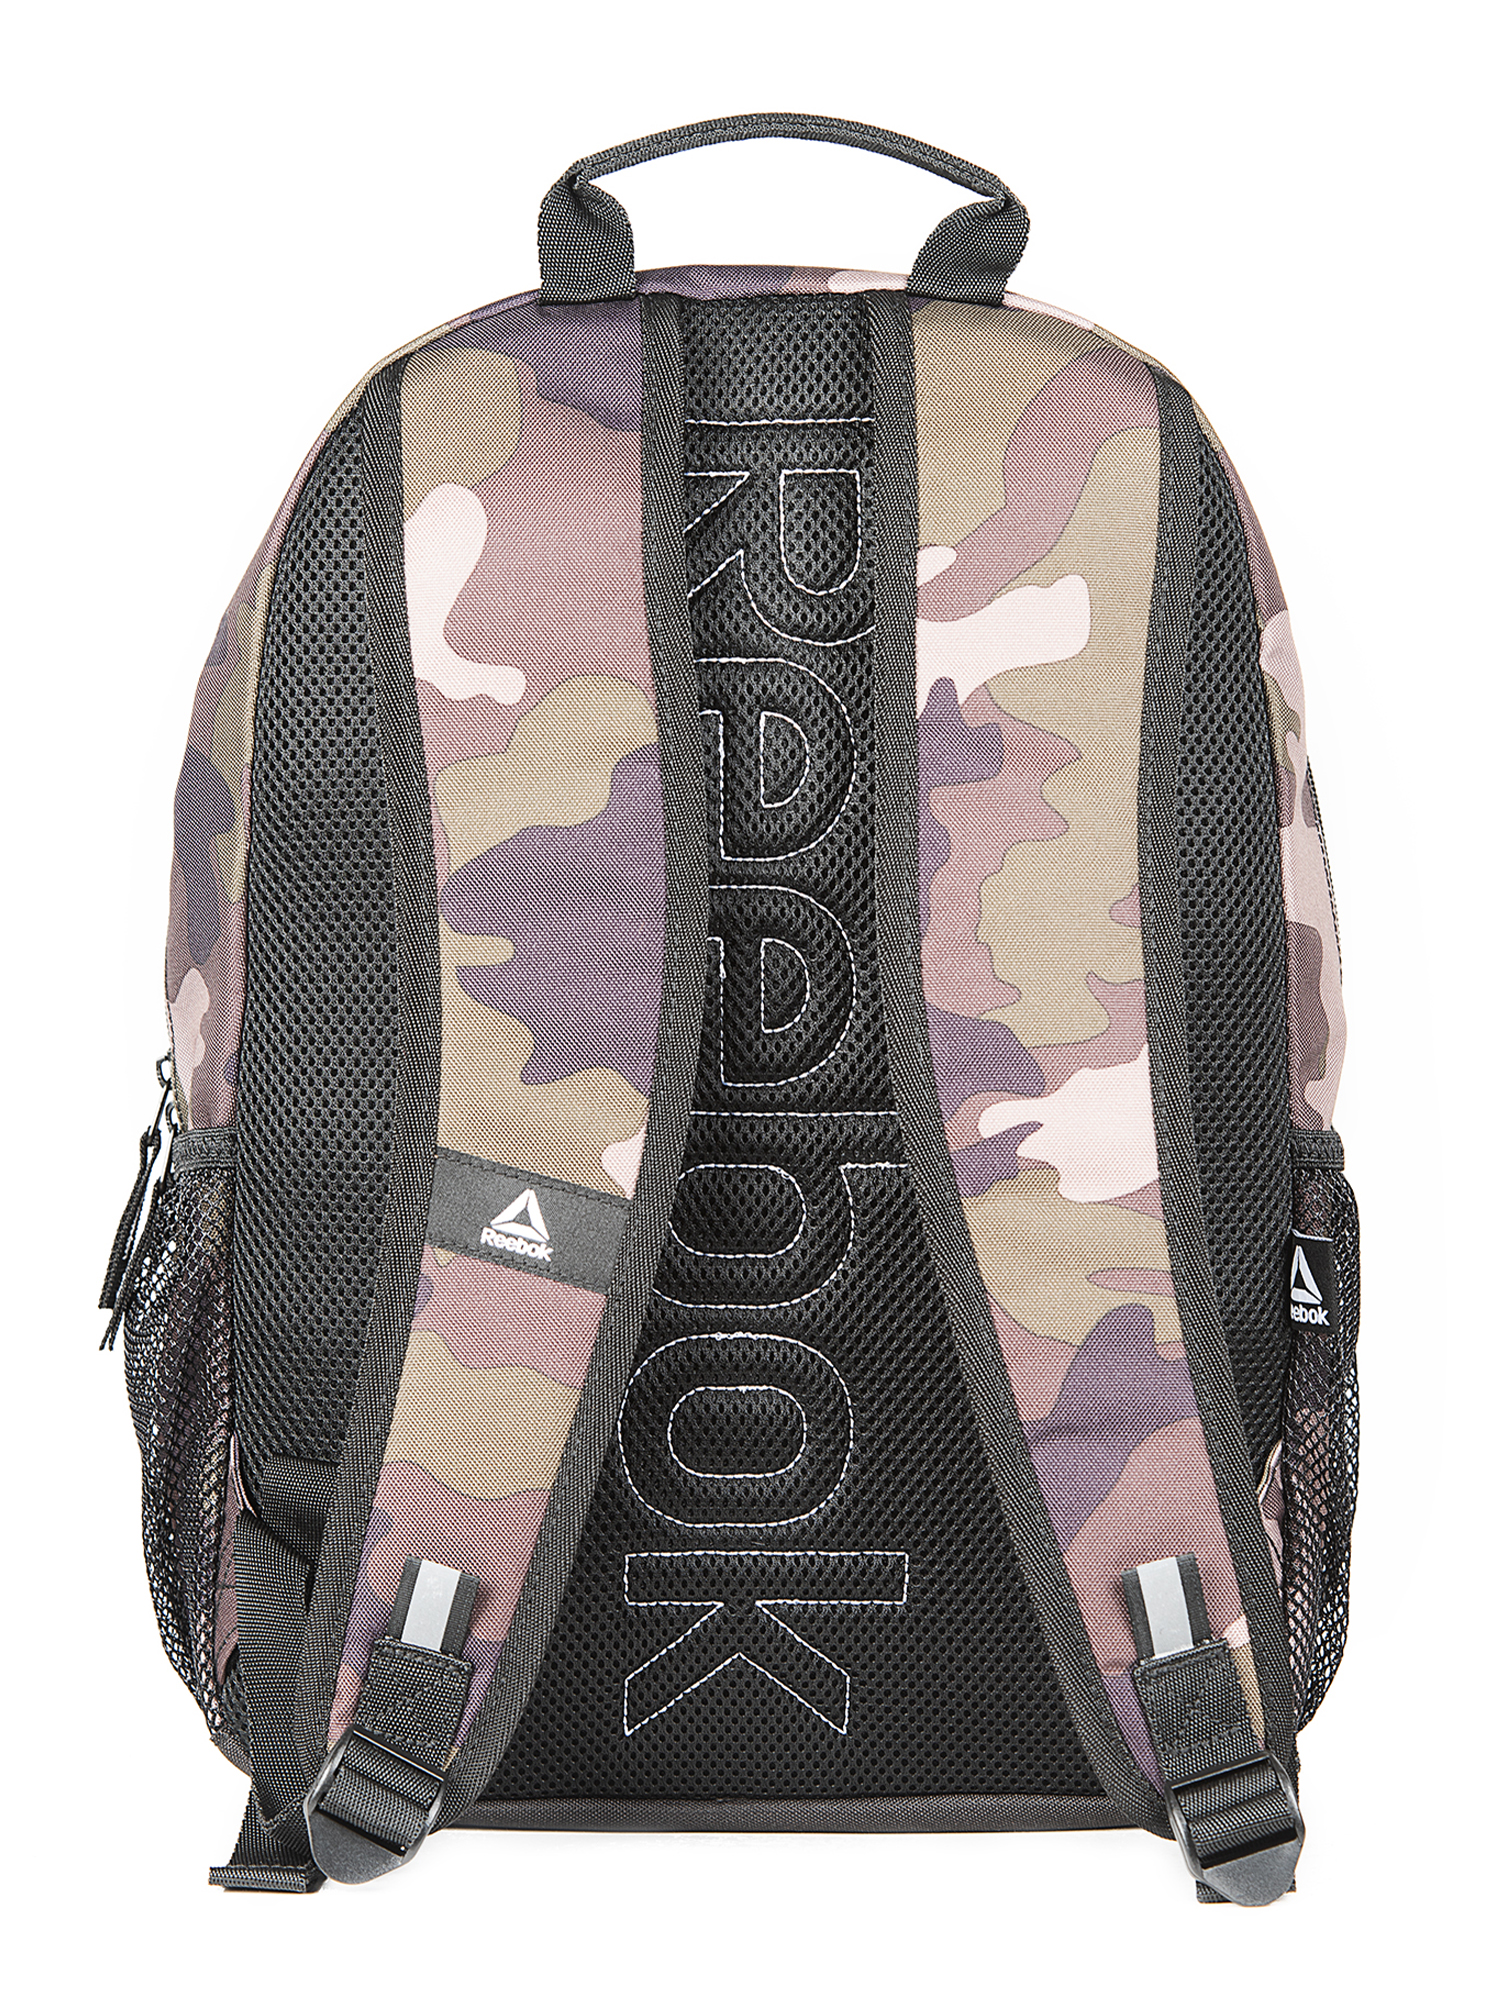 Reebok Unisex Riley Backpack with Lunch Box - Army Camo - image 2 of 4